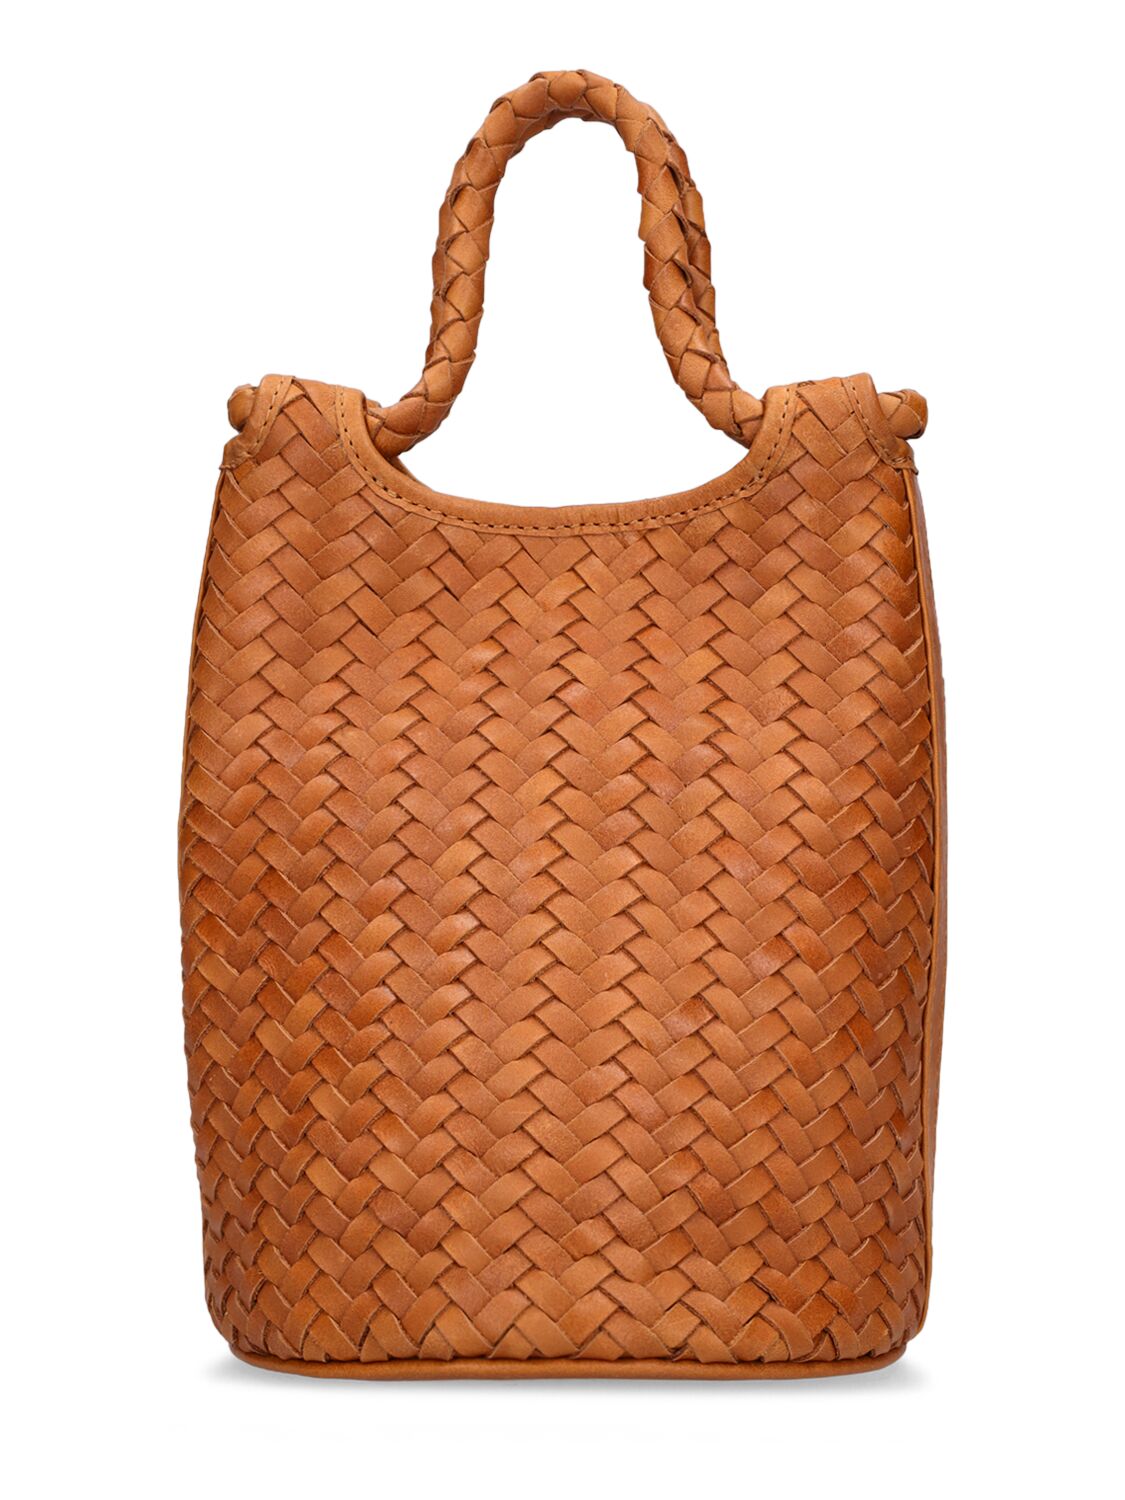 Bembien Lina Woven Leather Top Handle Bag In Copper